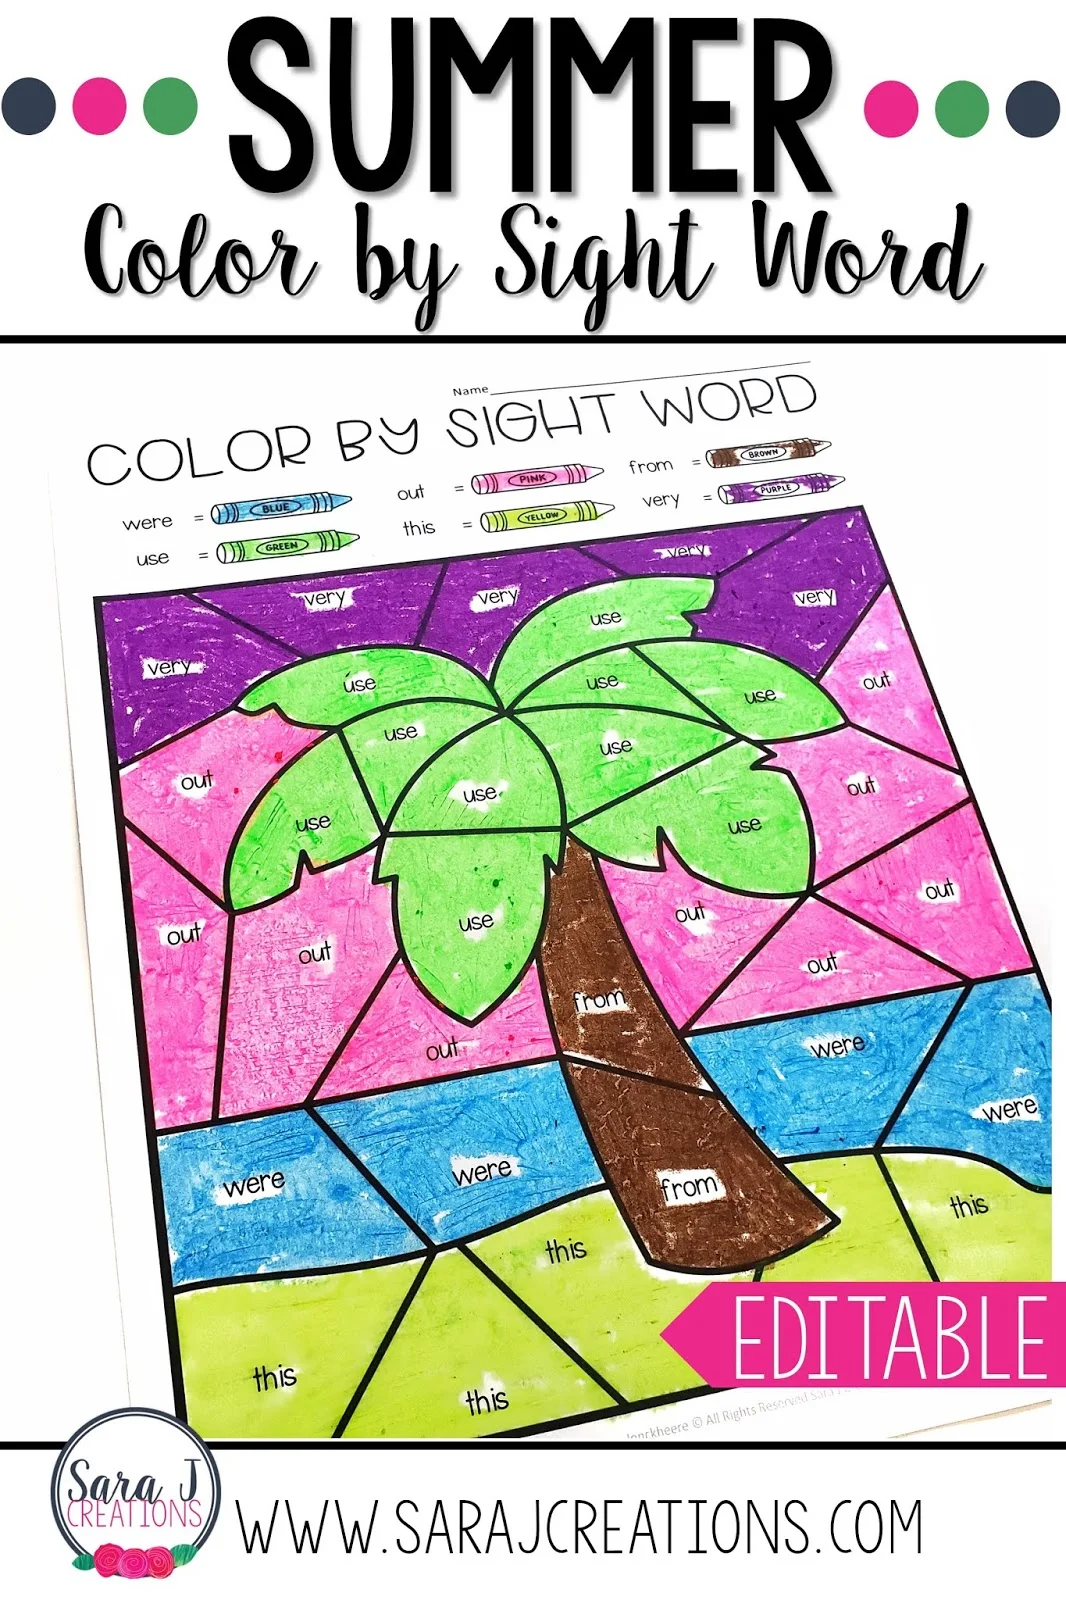 Editable Summer Color by Sight Word pages!!!! This is exactly what you need to make practicing sight words fun and meaningful for your students. You can easily differentiate for each student with a few quick clicks. No matter what sight words your students are working on, you can create personalized coloring worksheets in a snap! Includes summer and patriotic themed pictures.